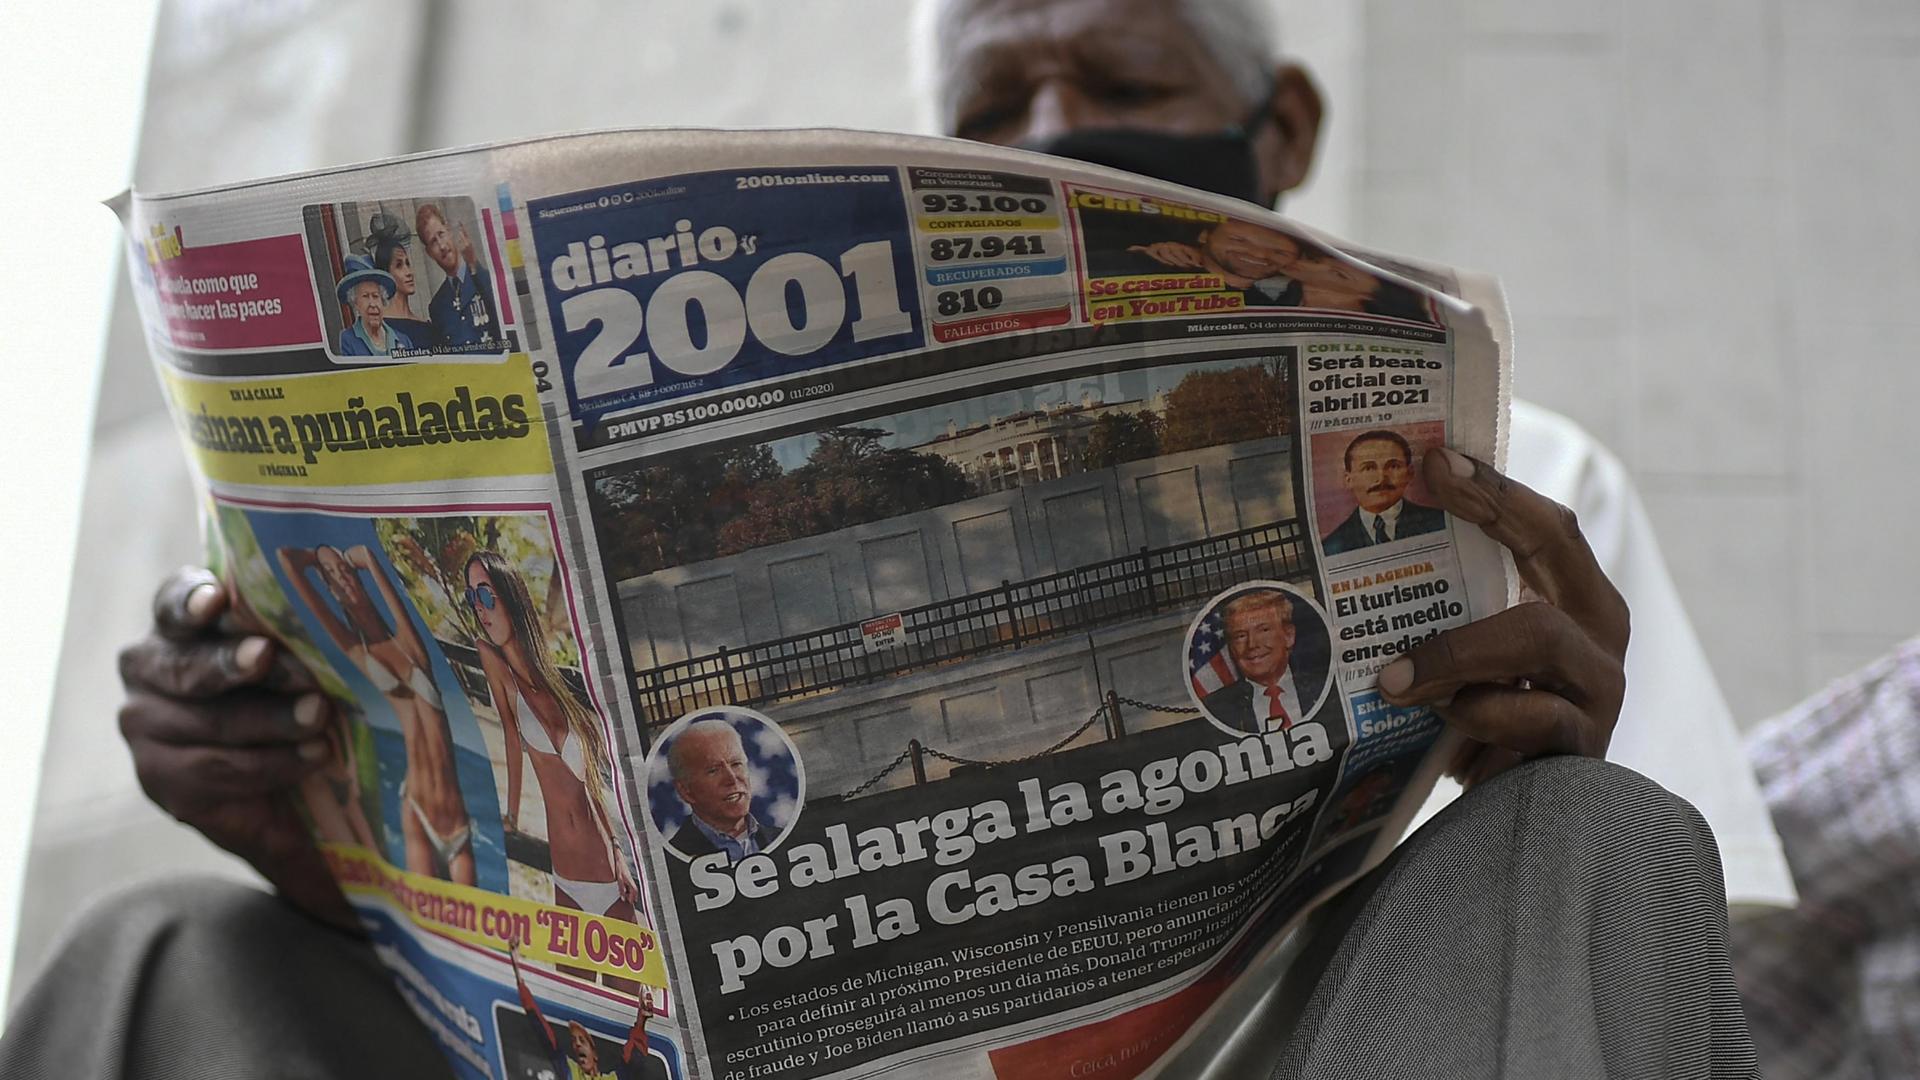 A man reads the Diario 2001 newspaper that carries the Spanish headline: "Agony is prolonged for the White House" at a newspaper stand in Caracas, Venezuela, Nov. 4, 2020, the day after US elections.